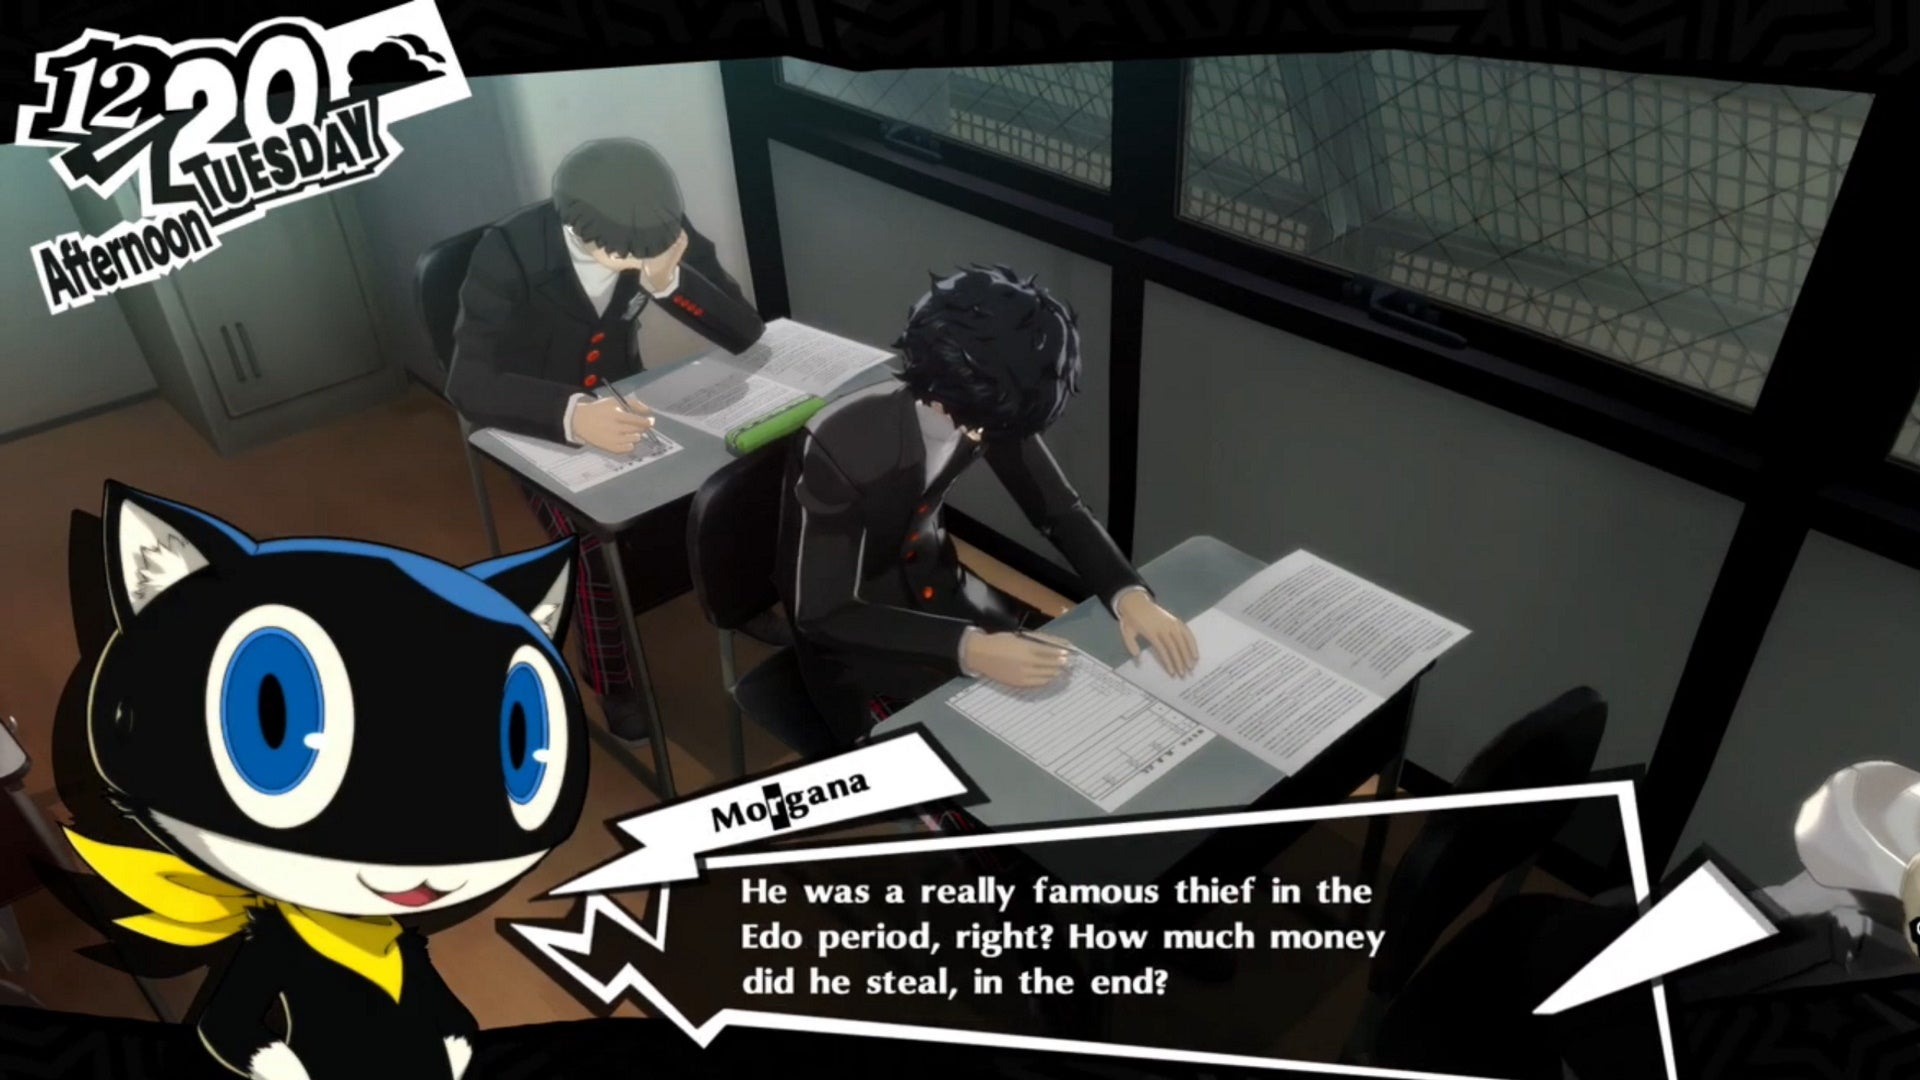 Persona 5 Royal classroom answers December: An anime cat is asking about a thief's plunder